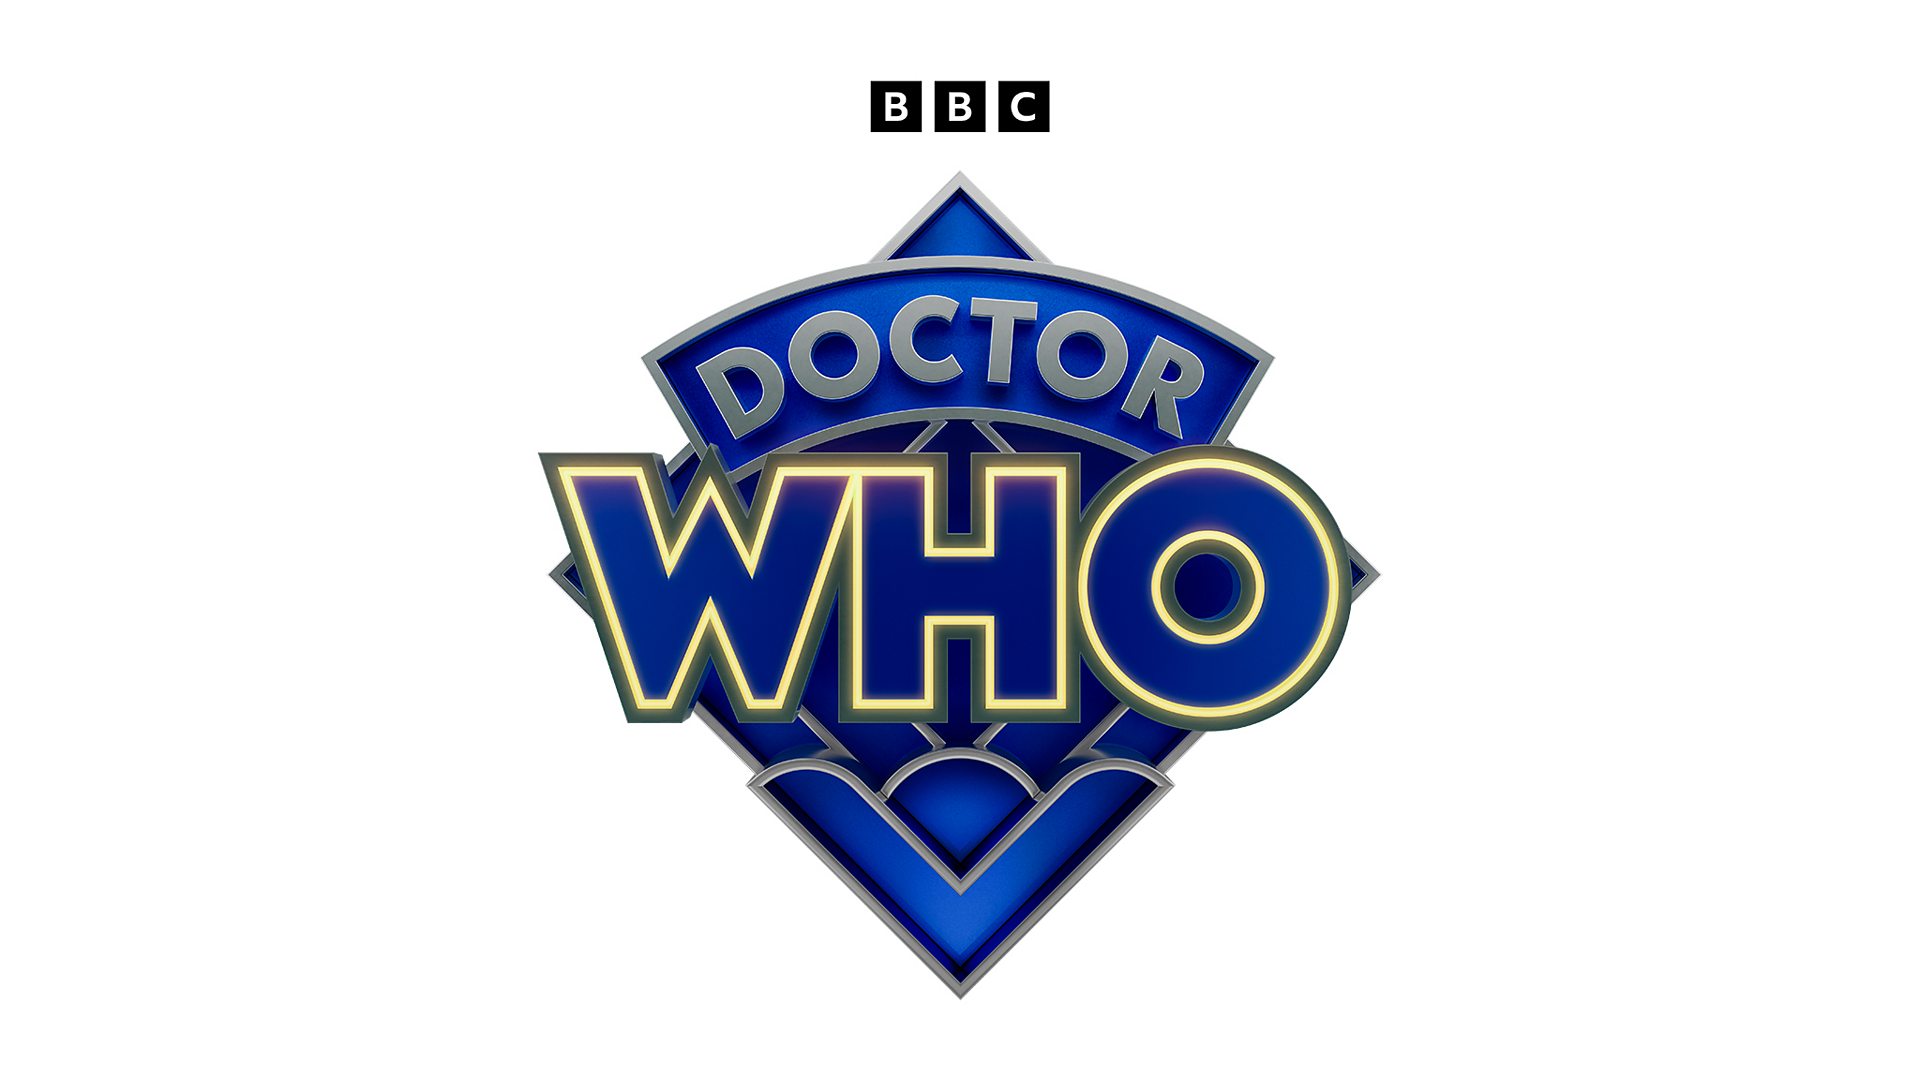 BBC and Disney Branded Television join forces on Doctor Who